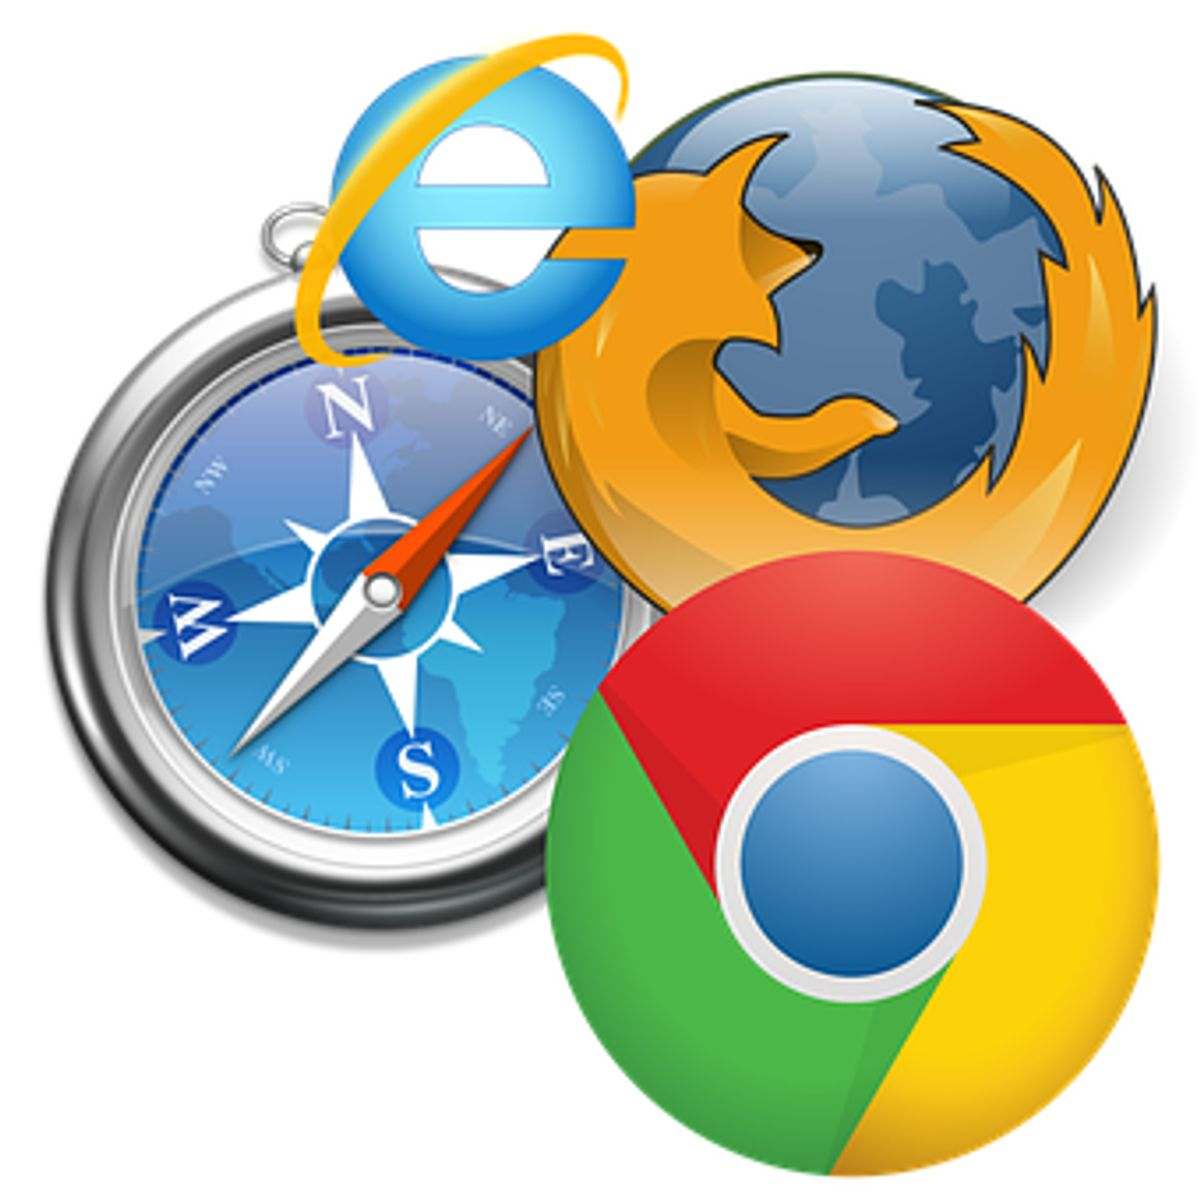 browserstack chrome